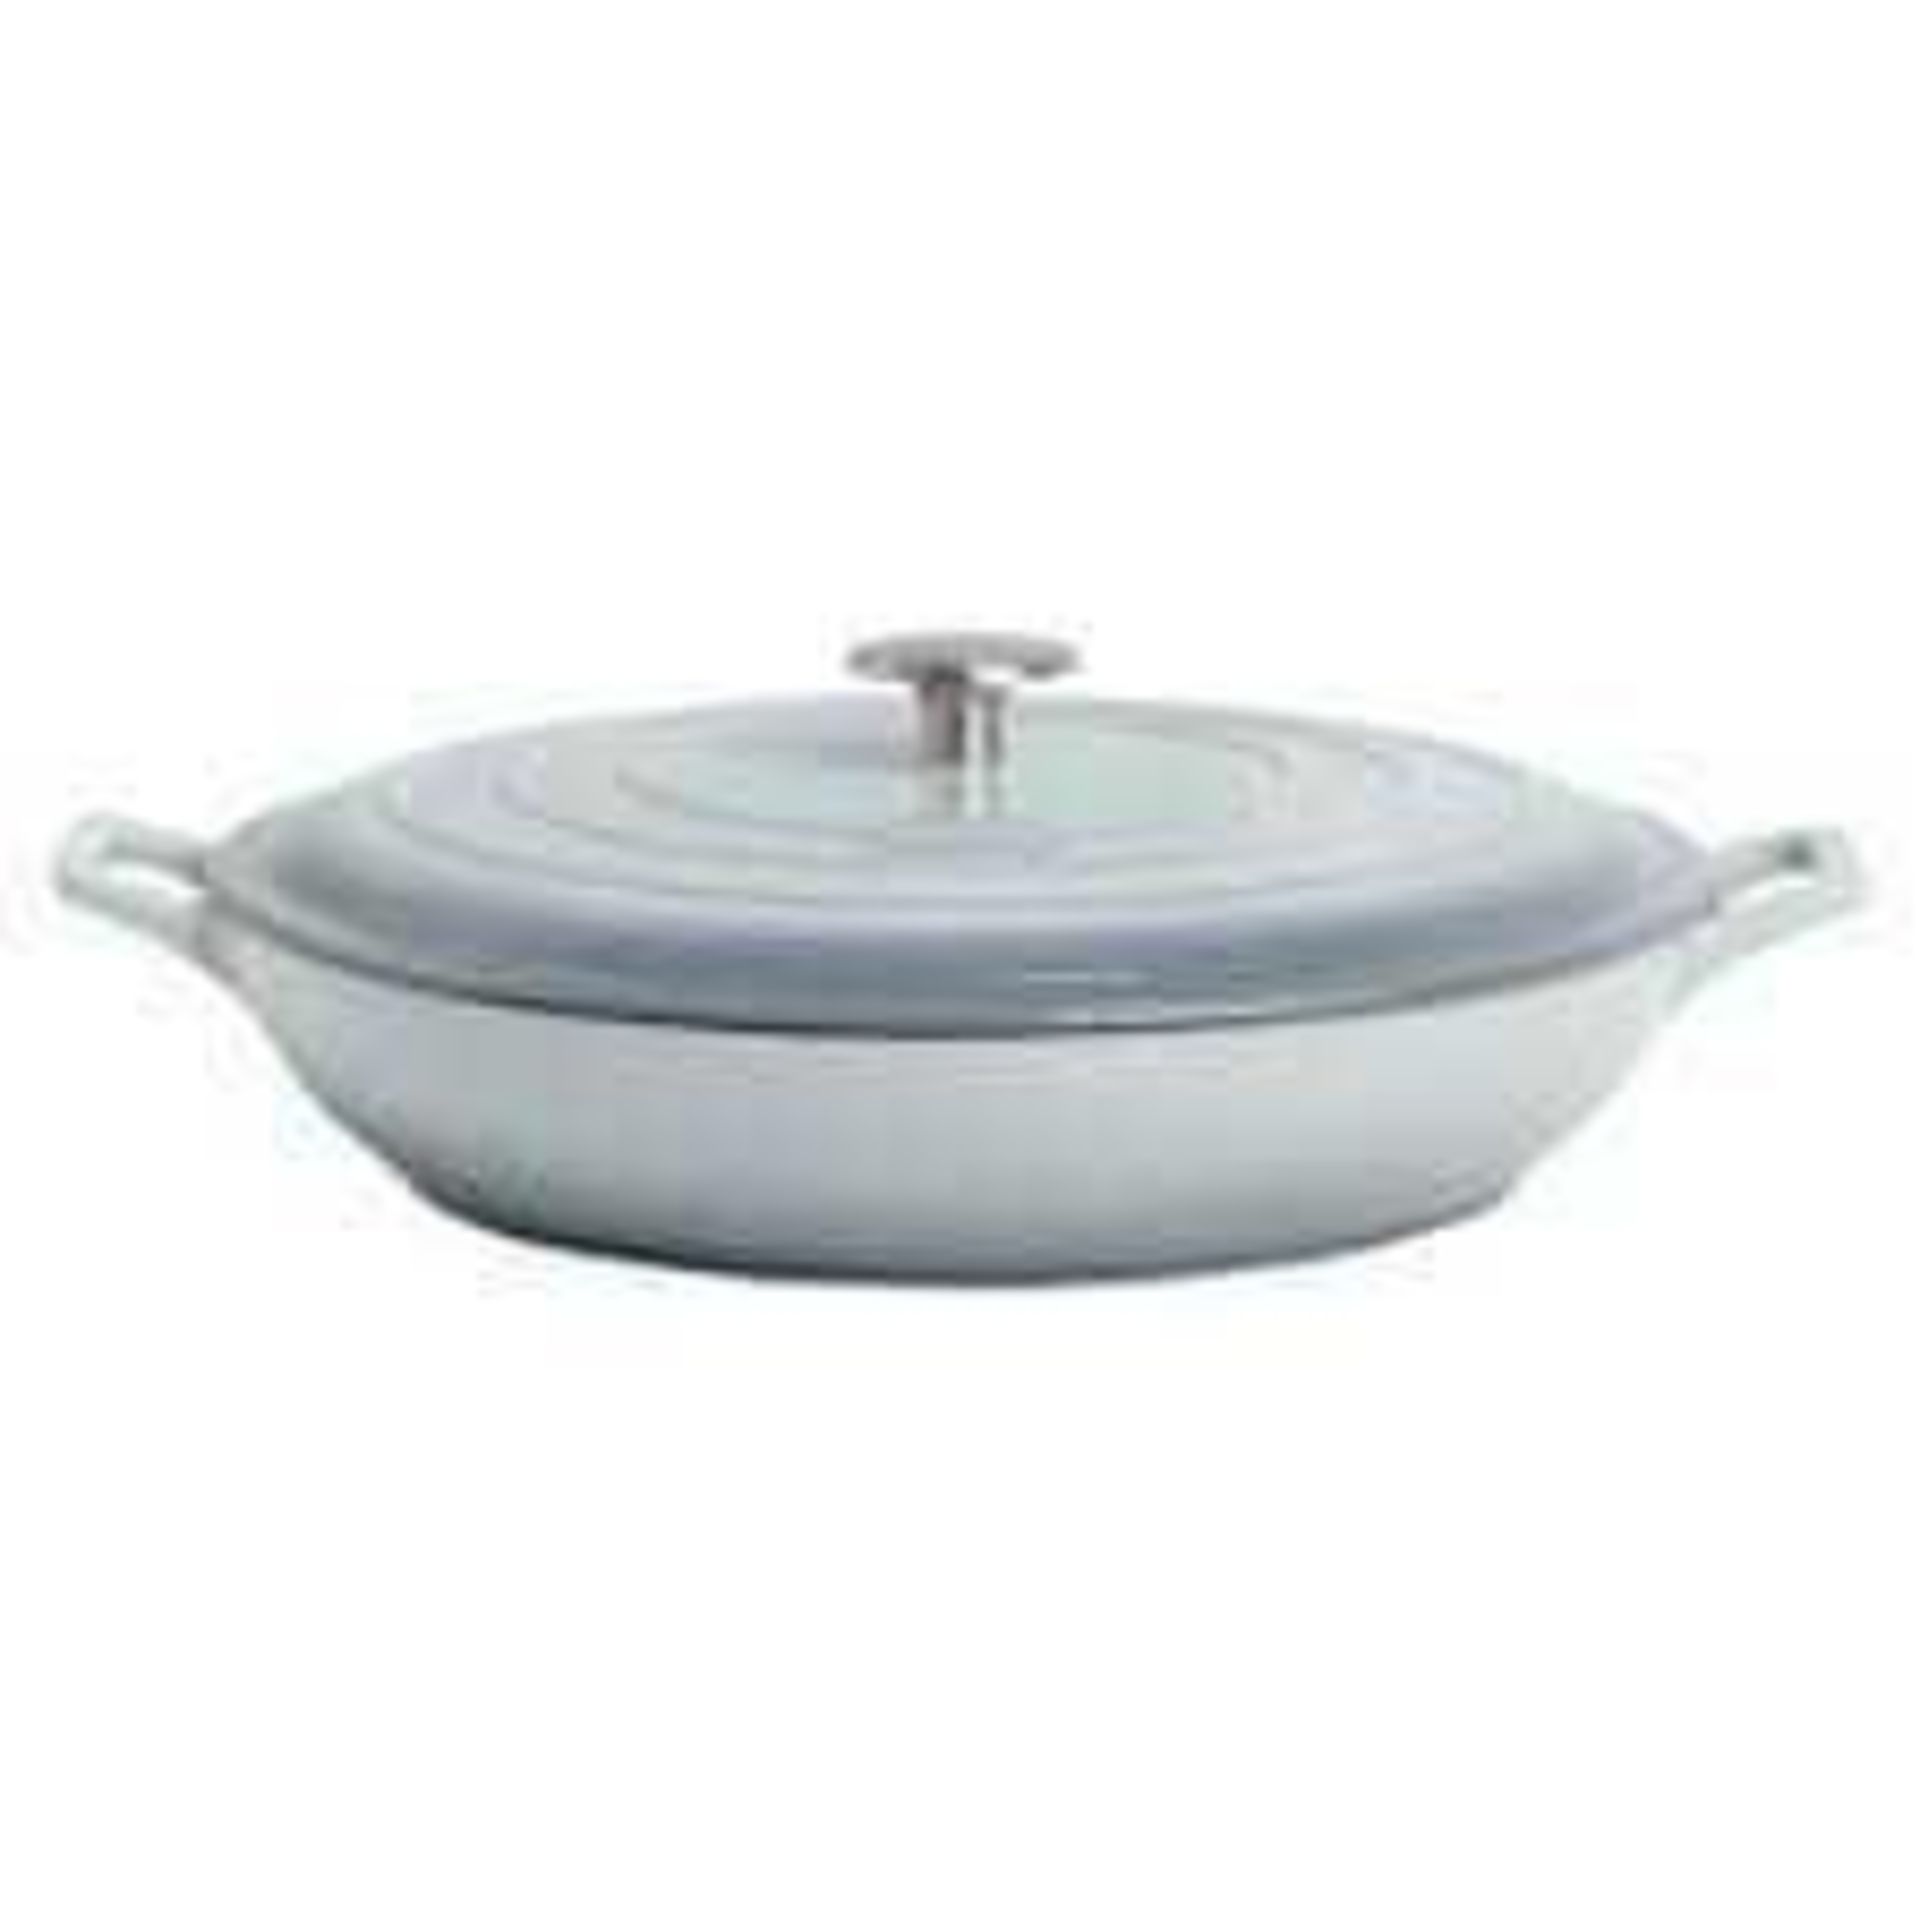 Combined RRP £165 Lot To Contain Three Boxed John Lewis Cast Iron Casserole Dishes In Assorted Sizes - Image 3 of 3